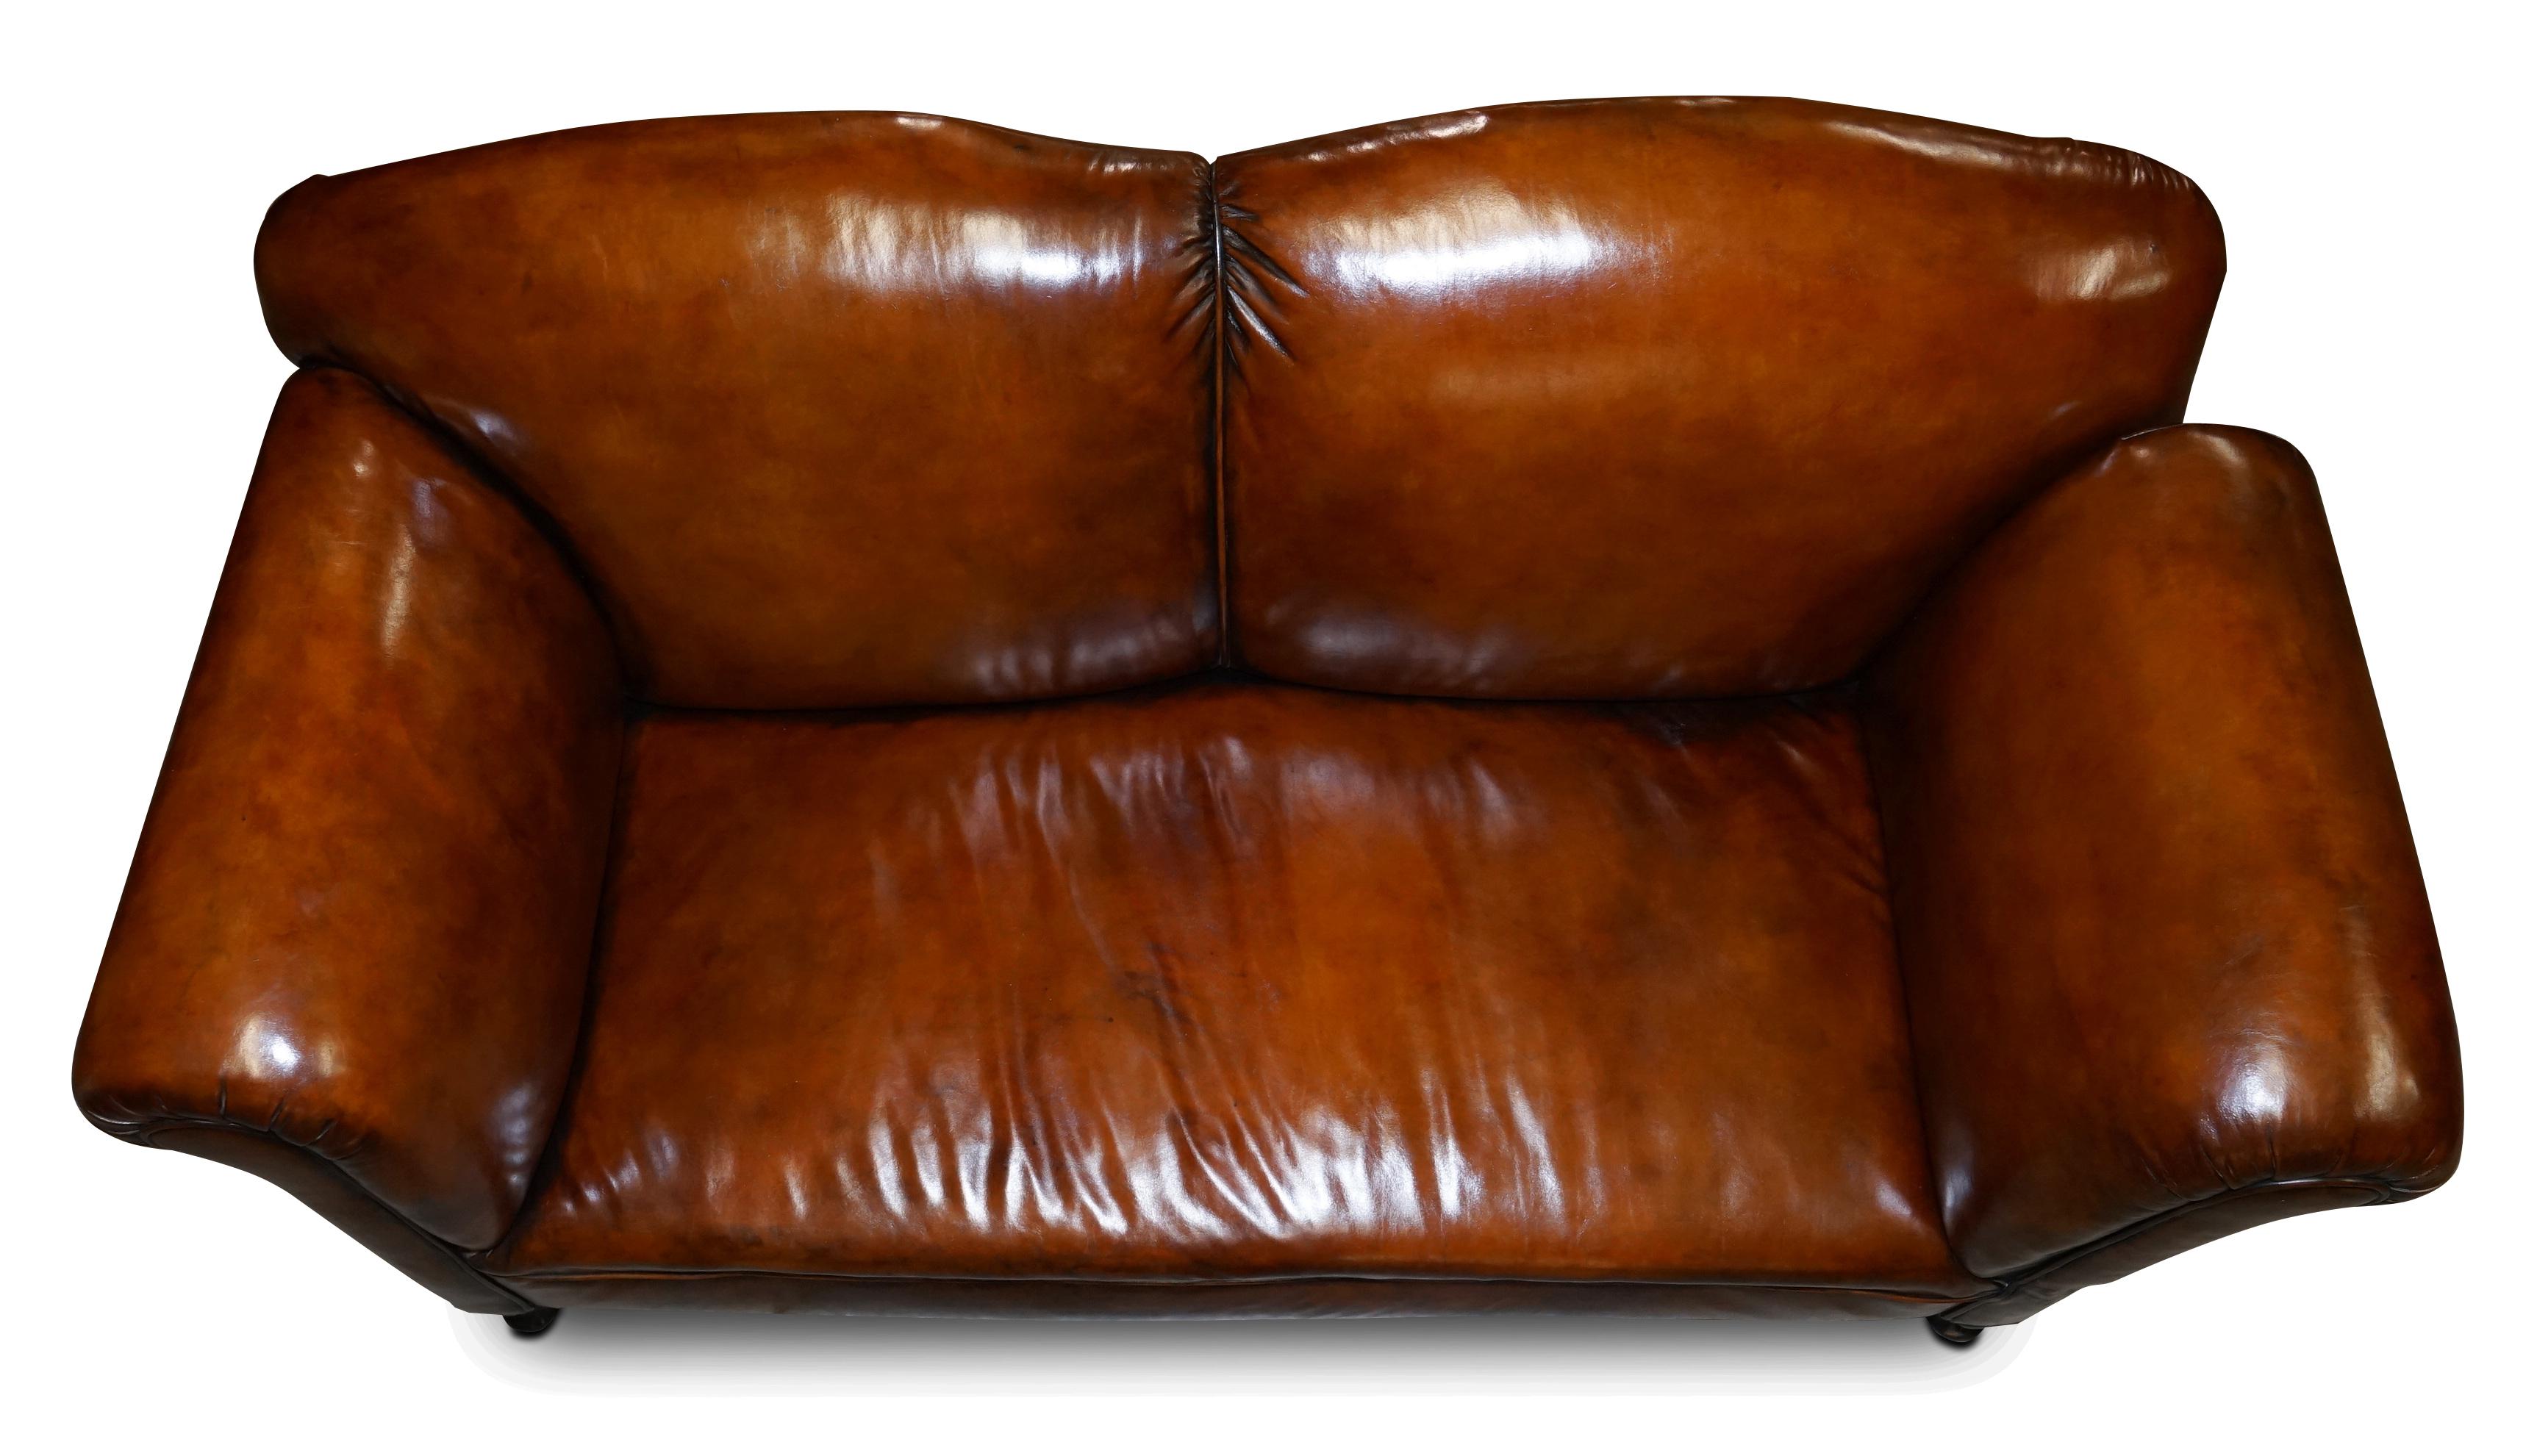 Hand-Crafted Fully Restored Whisky Brown Leather Drop Arm Chaise Lounge Sofa Horse Hair Fill For Sale